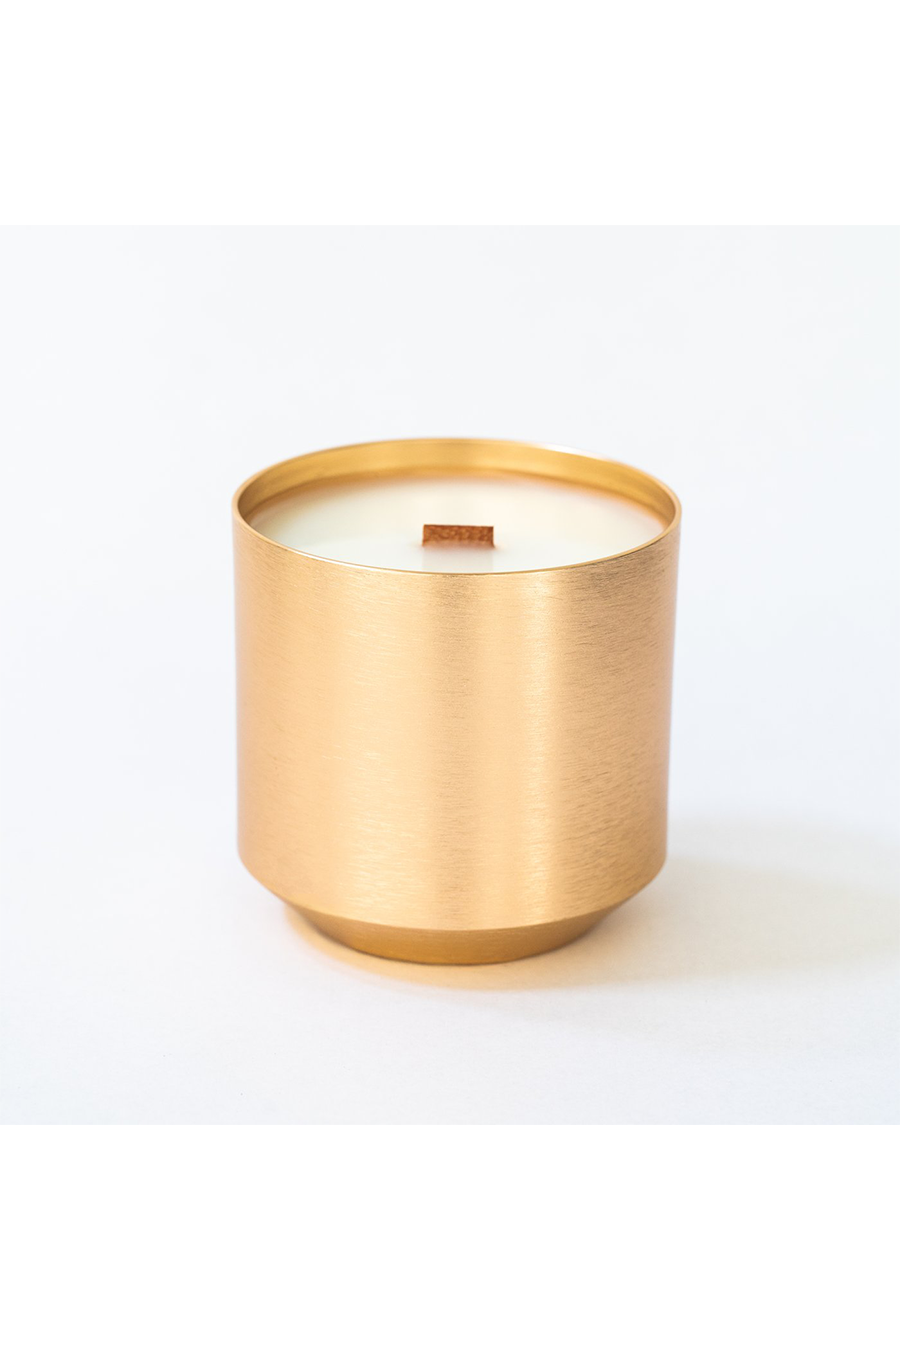 Amber + Vanilla Candle | Gold 10oz - Main Image Number 1 of 1